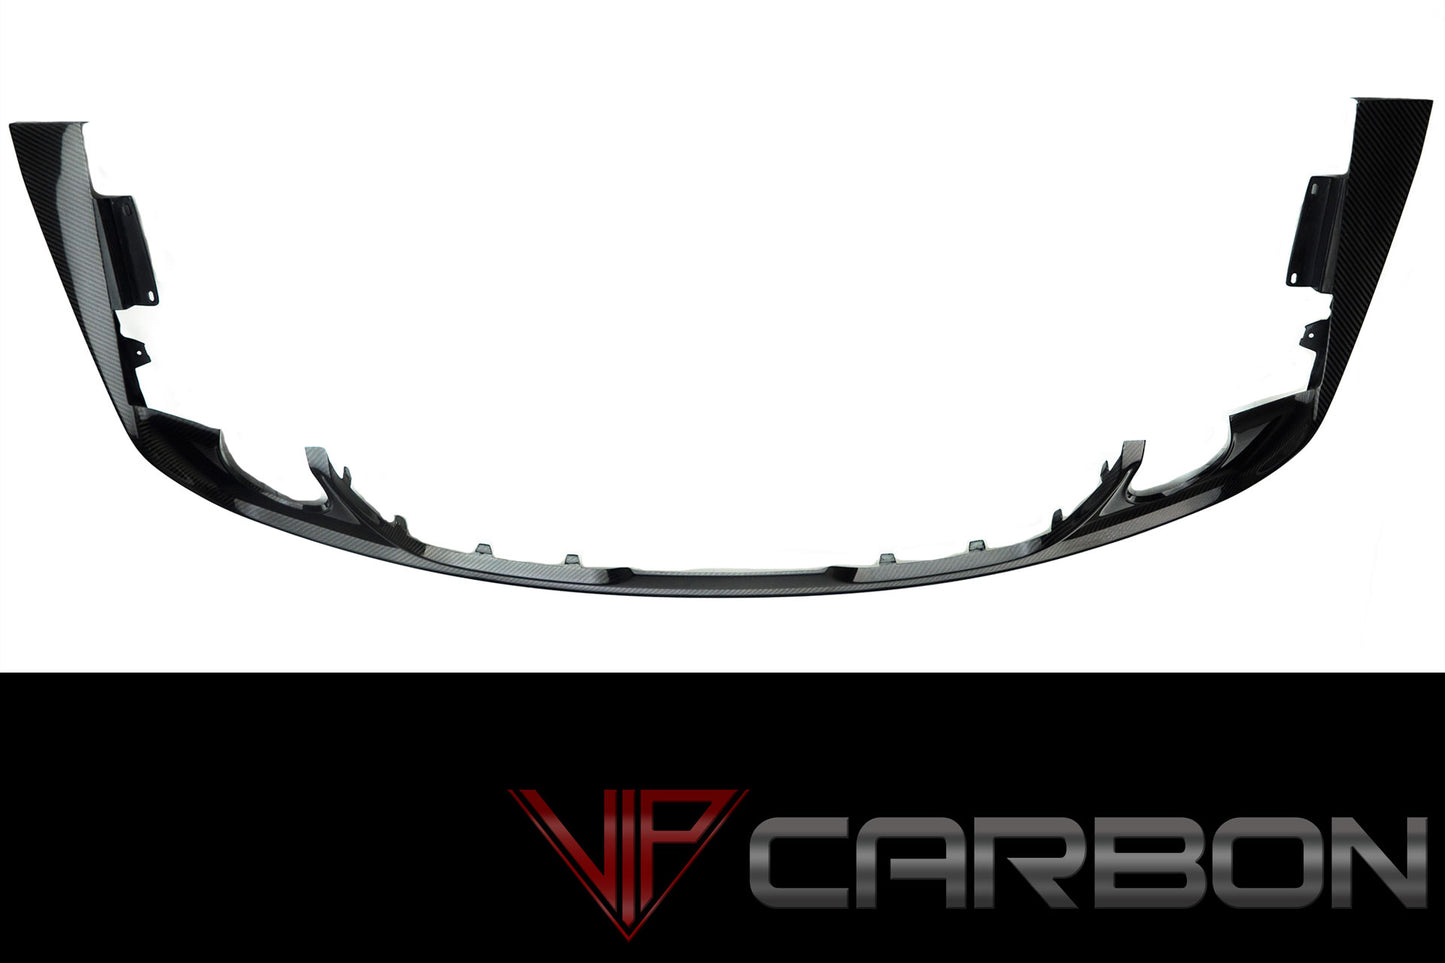 Carbon Fiber GT Rear Diffuser Ford Mustang 2015-2018 by VIP